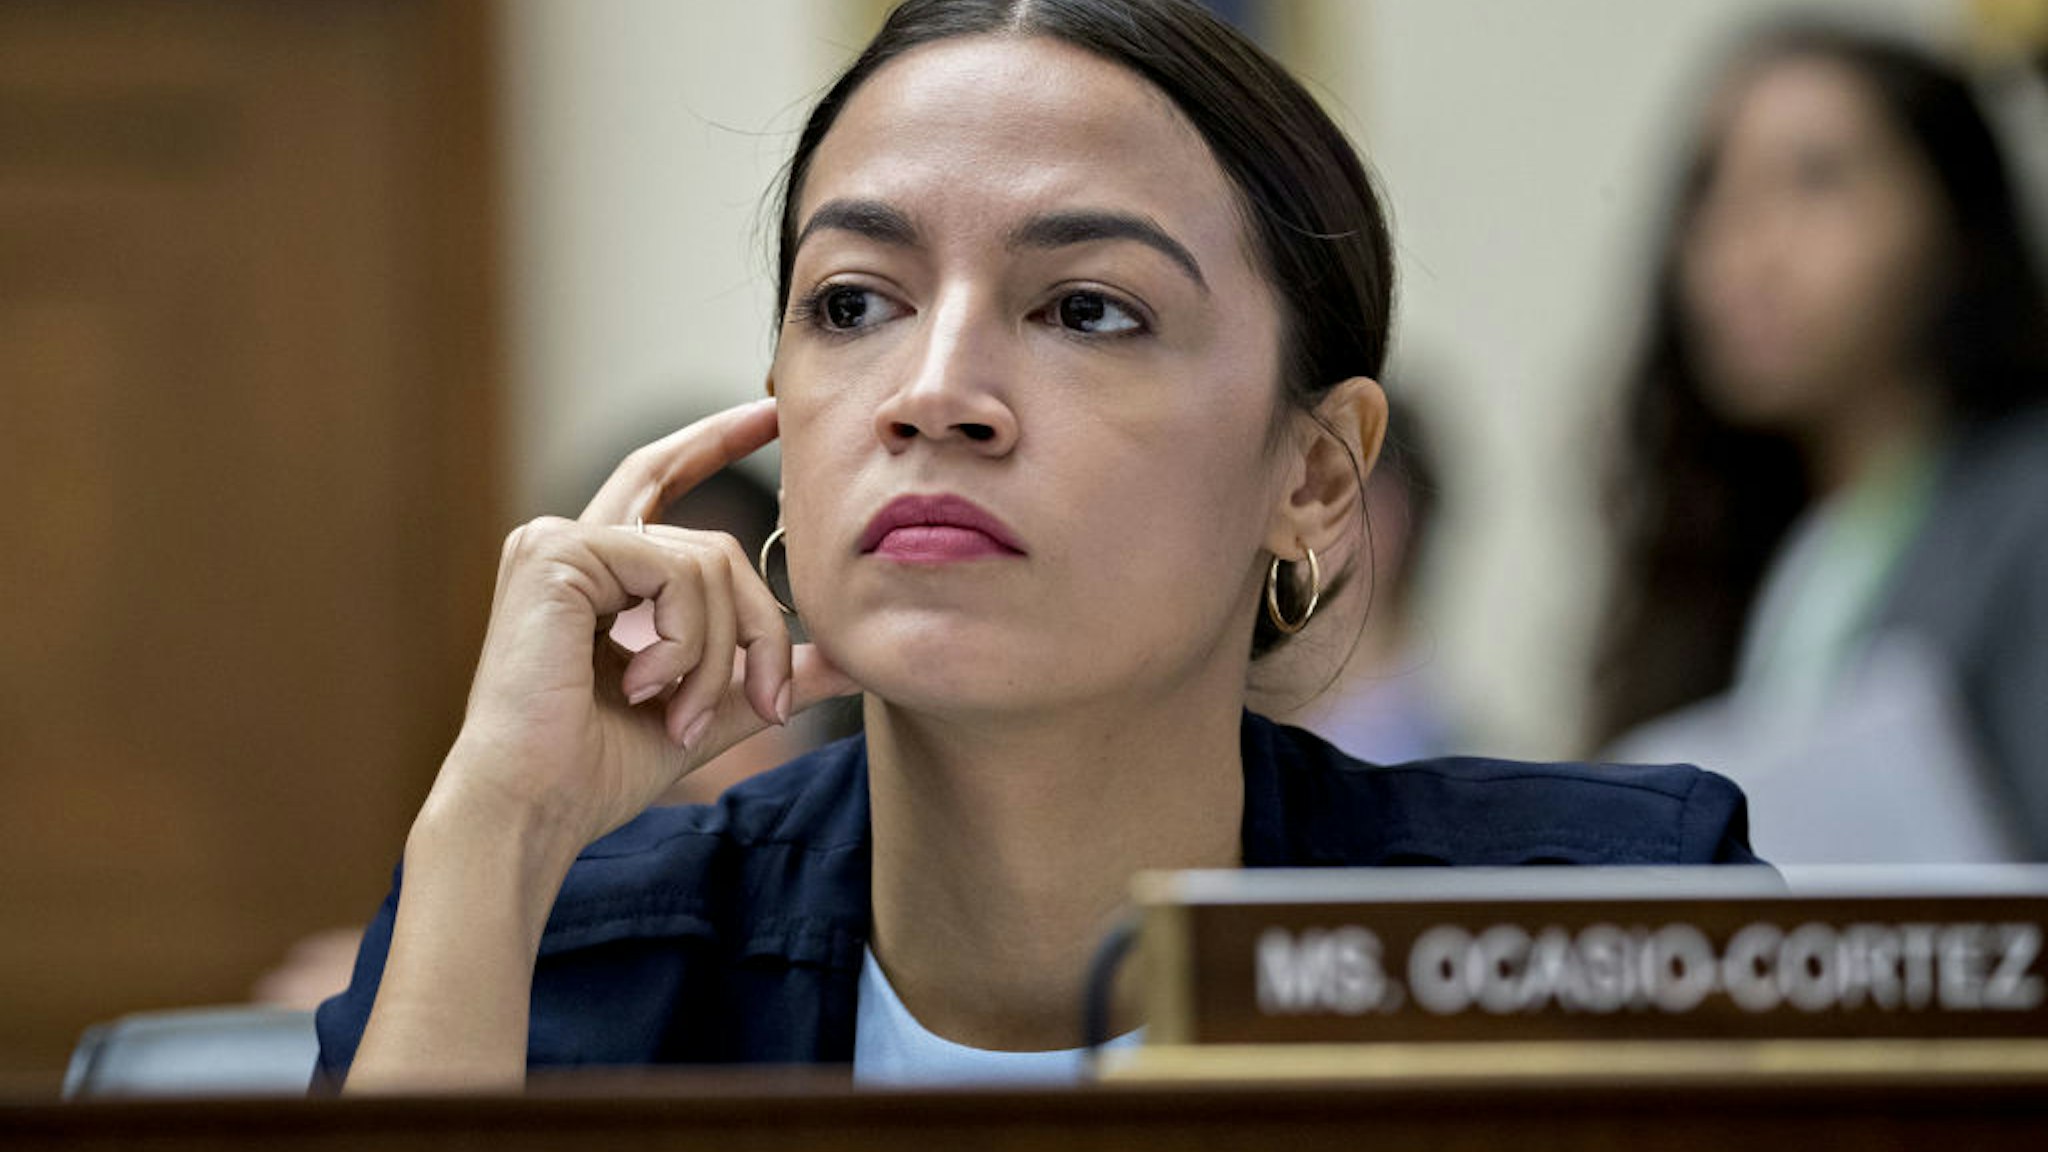 Representative Alexandria Ocasio-Cortez, a Democrat from New York, listens during a House Financial Services Committee hearing with David Marcus, head of blockchain with Facebook Inc., not pictured, in Washington, D.C., U.S., on Wednesday, July 17, 2019. Republican and Democratic Senators sharply questioned Facebook Inc.'s plan to create its own digital money, adding to a chorus of skepticism across Washington and underscoring the challenges the company faces in getting its cryptocurrency off the ground.